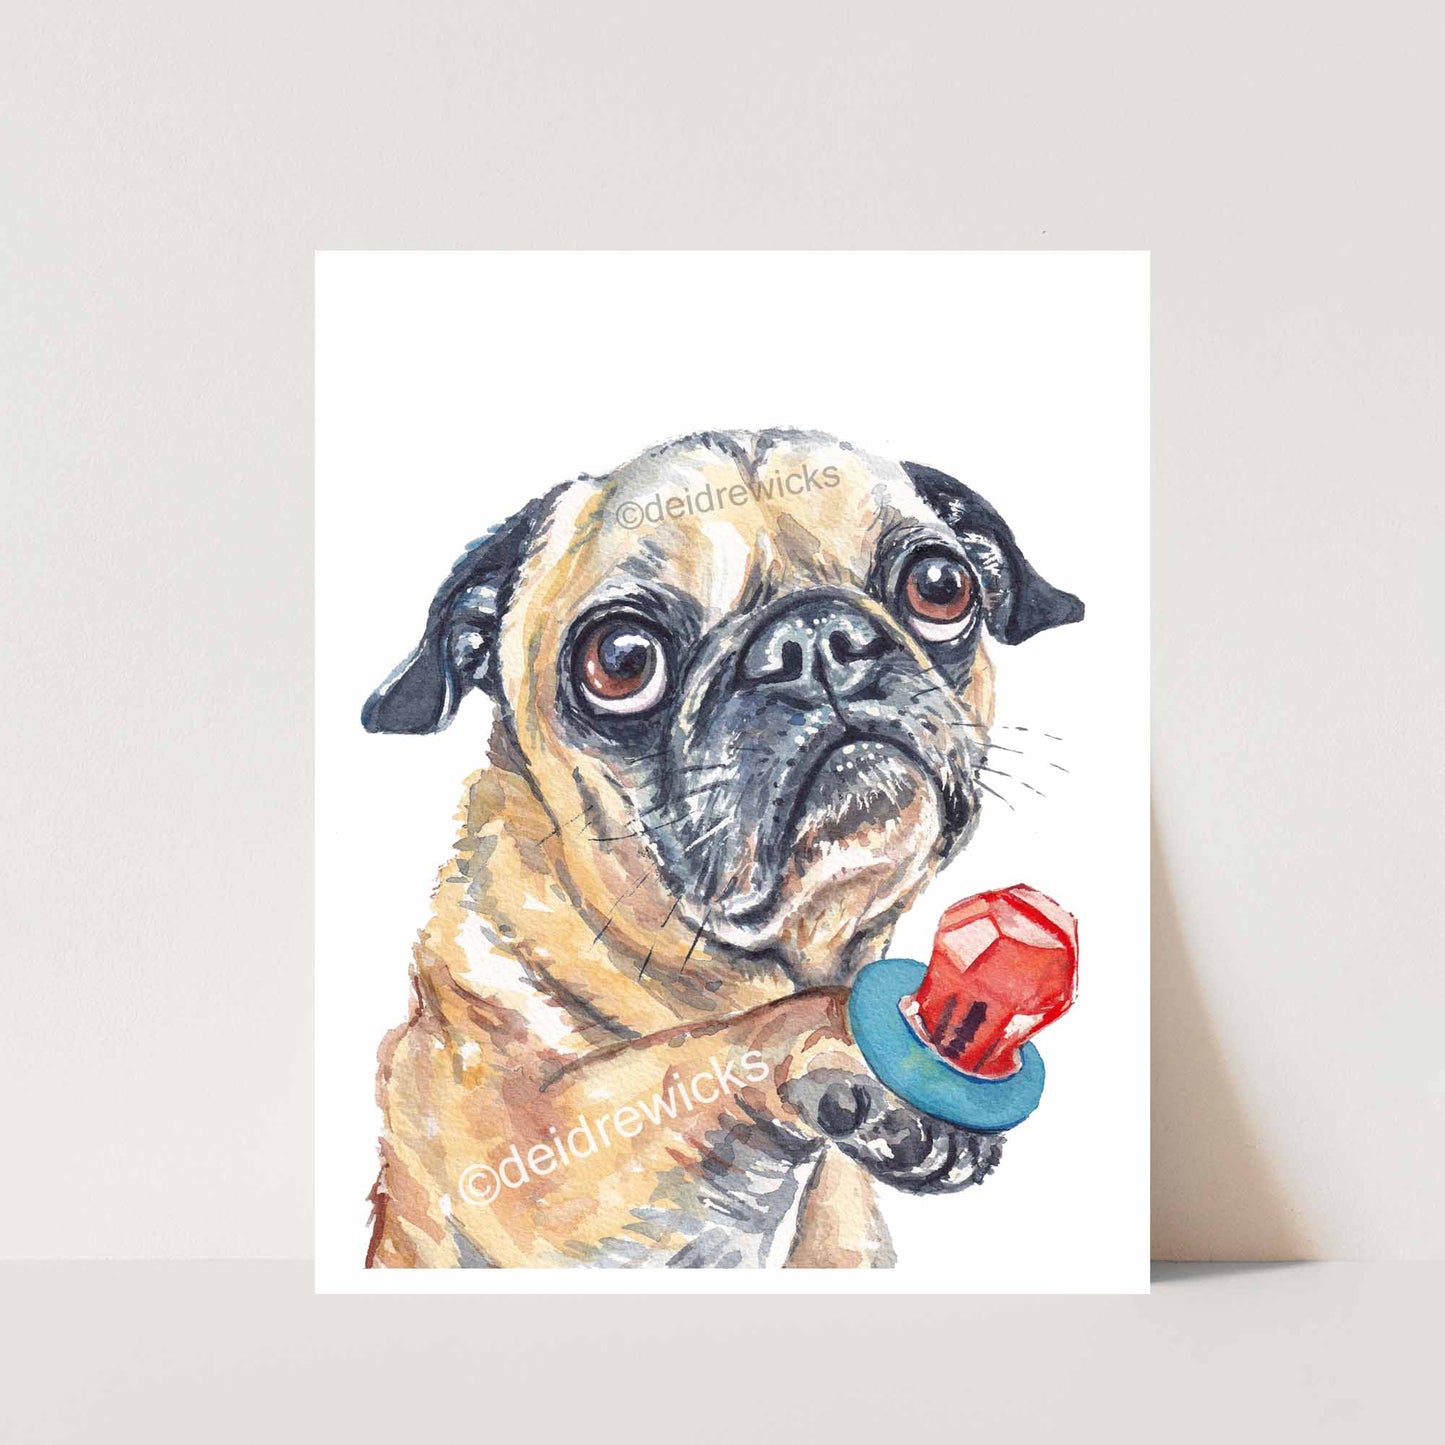 Watercolour painting print featuring an adorable pug dog offering a lick of his candy ring lollipop. Original art by Deidre Wicks